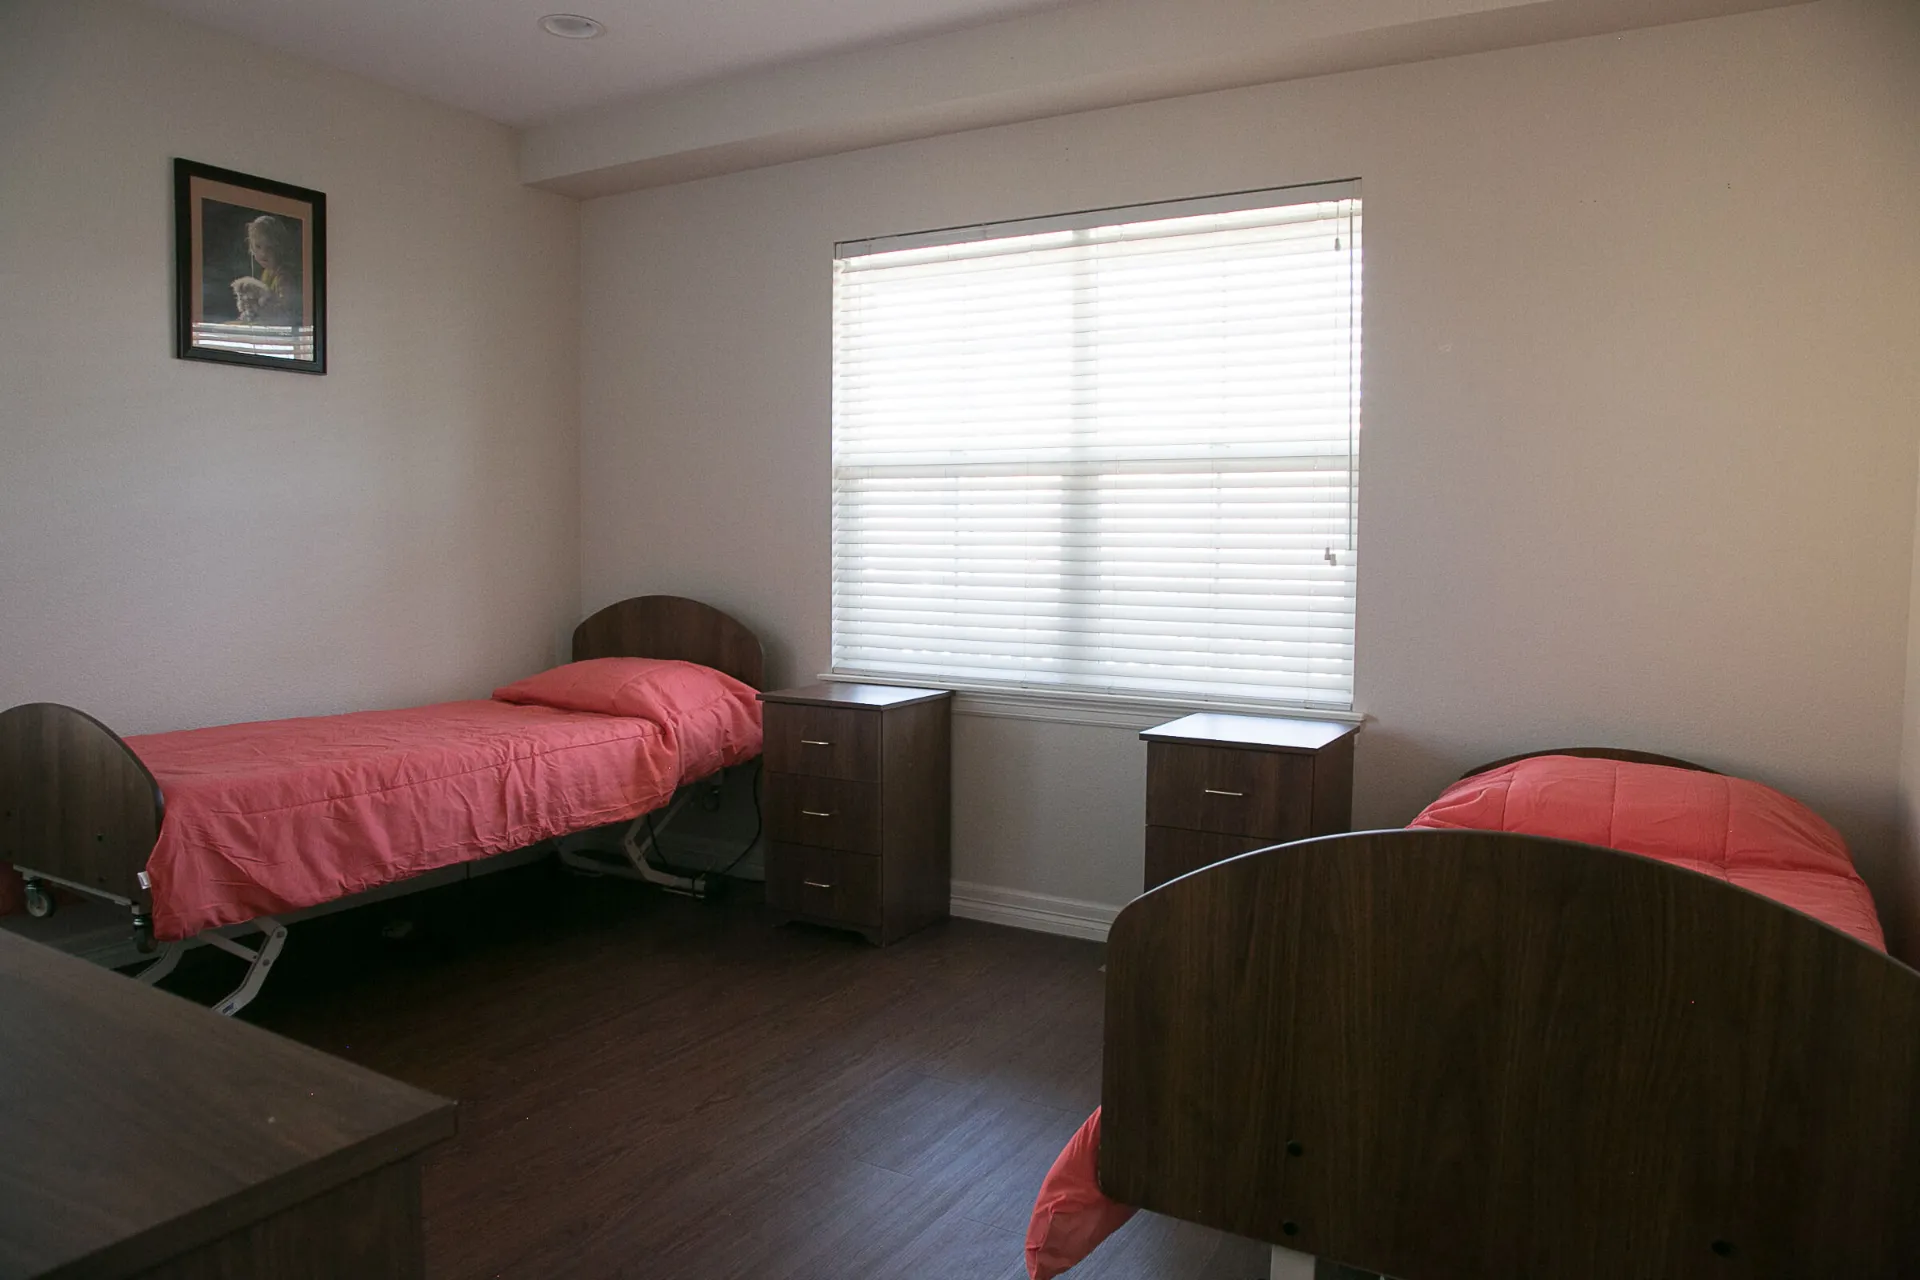 Another bedroom with two beds, dressers, and pictures on the walls.